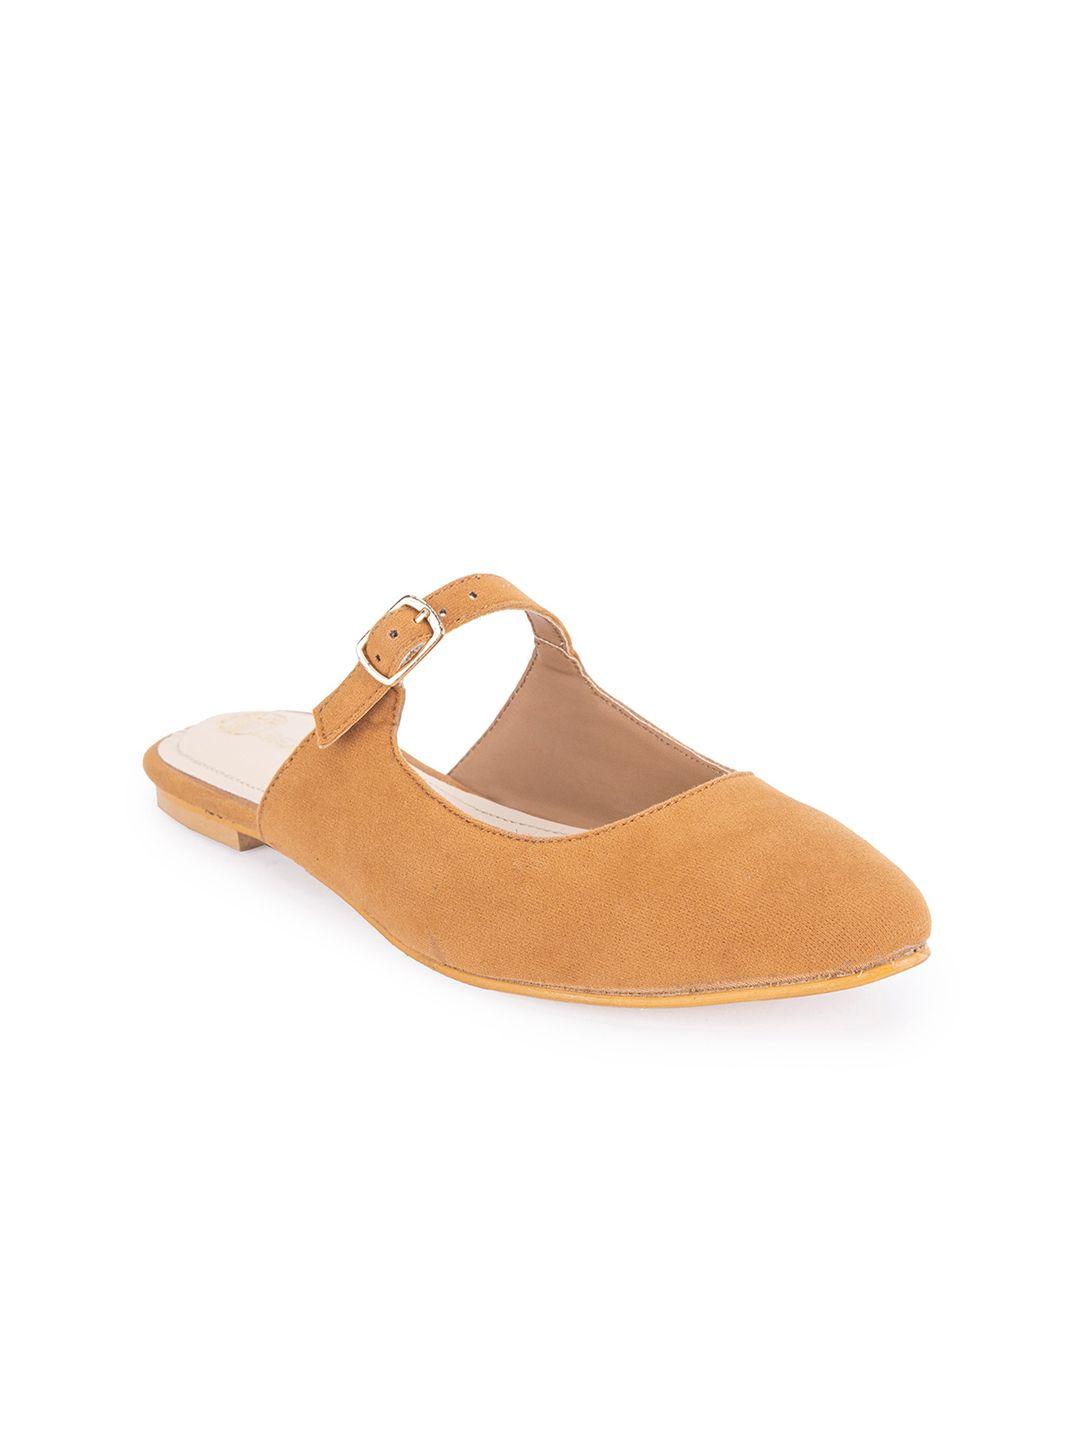 beaver pointed toe mules with buckles detail